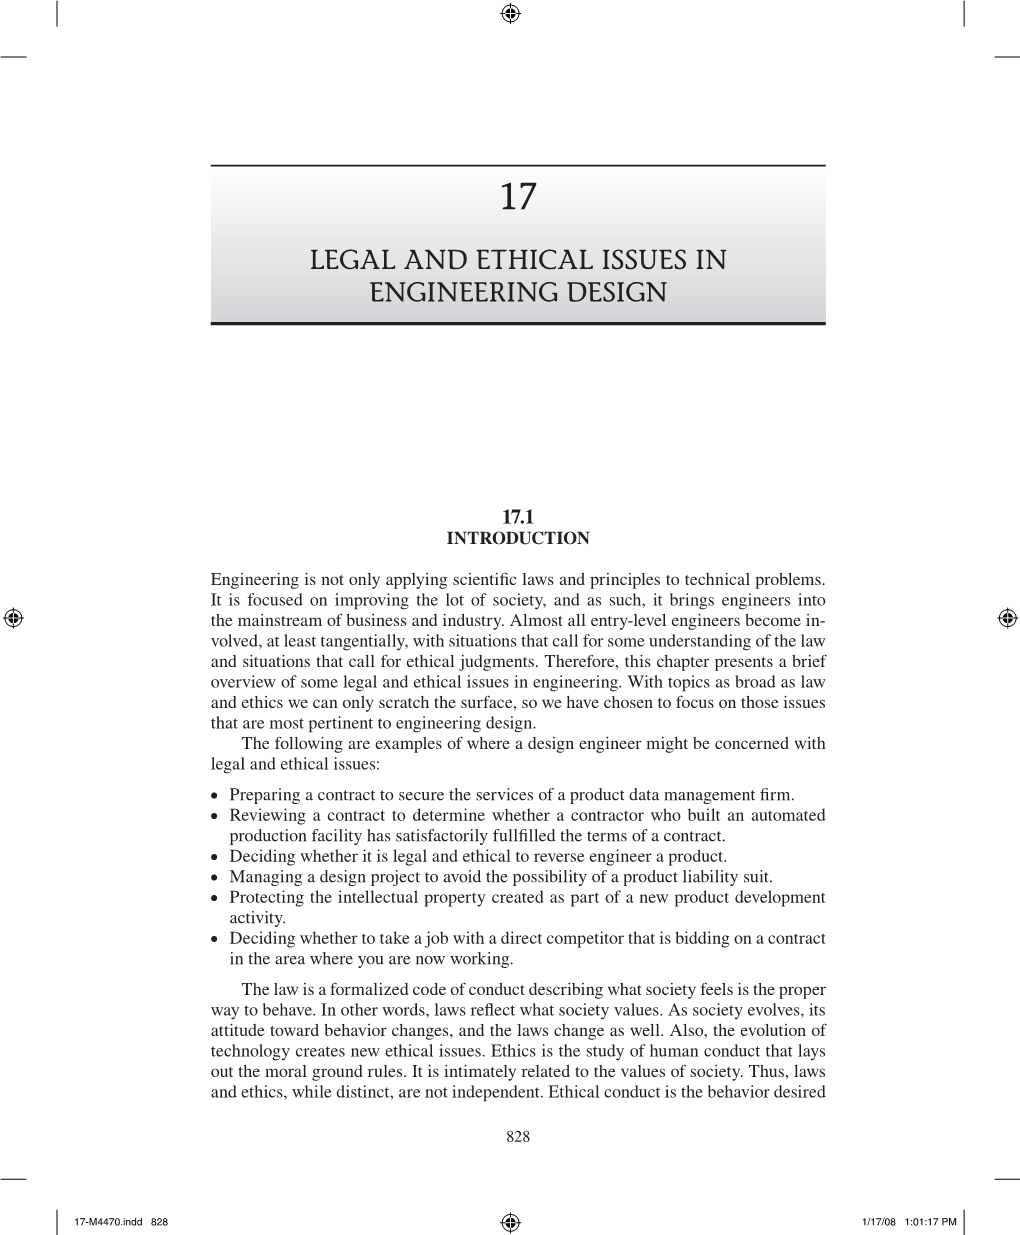 Legal and Ethical Issues in Engineering Design